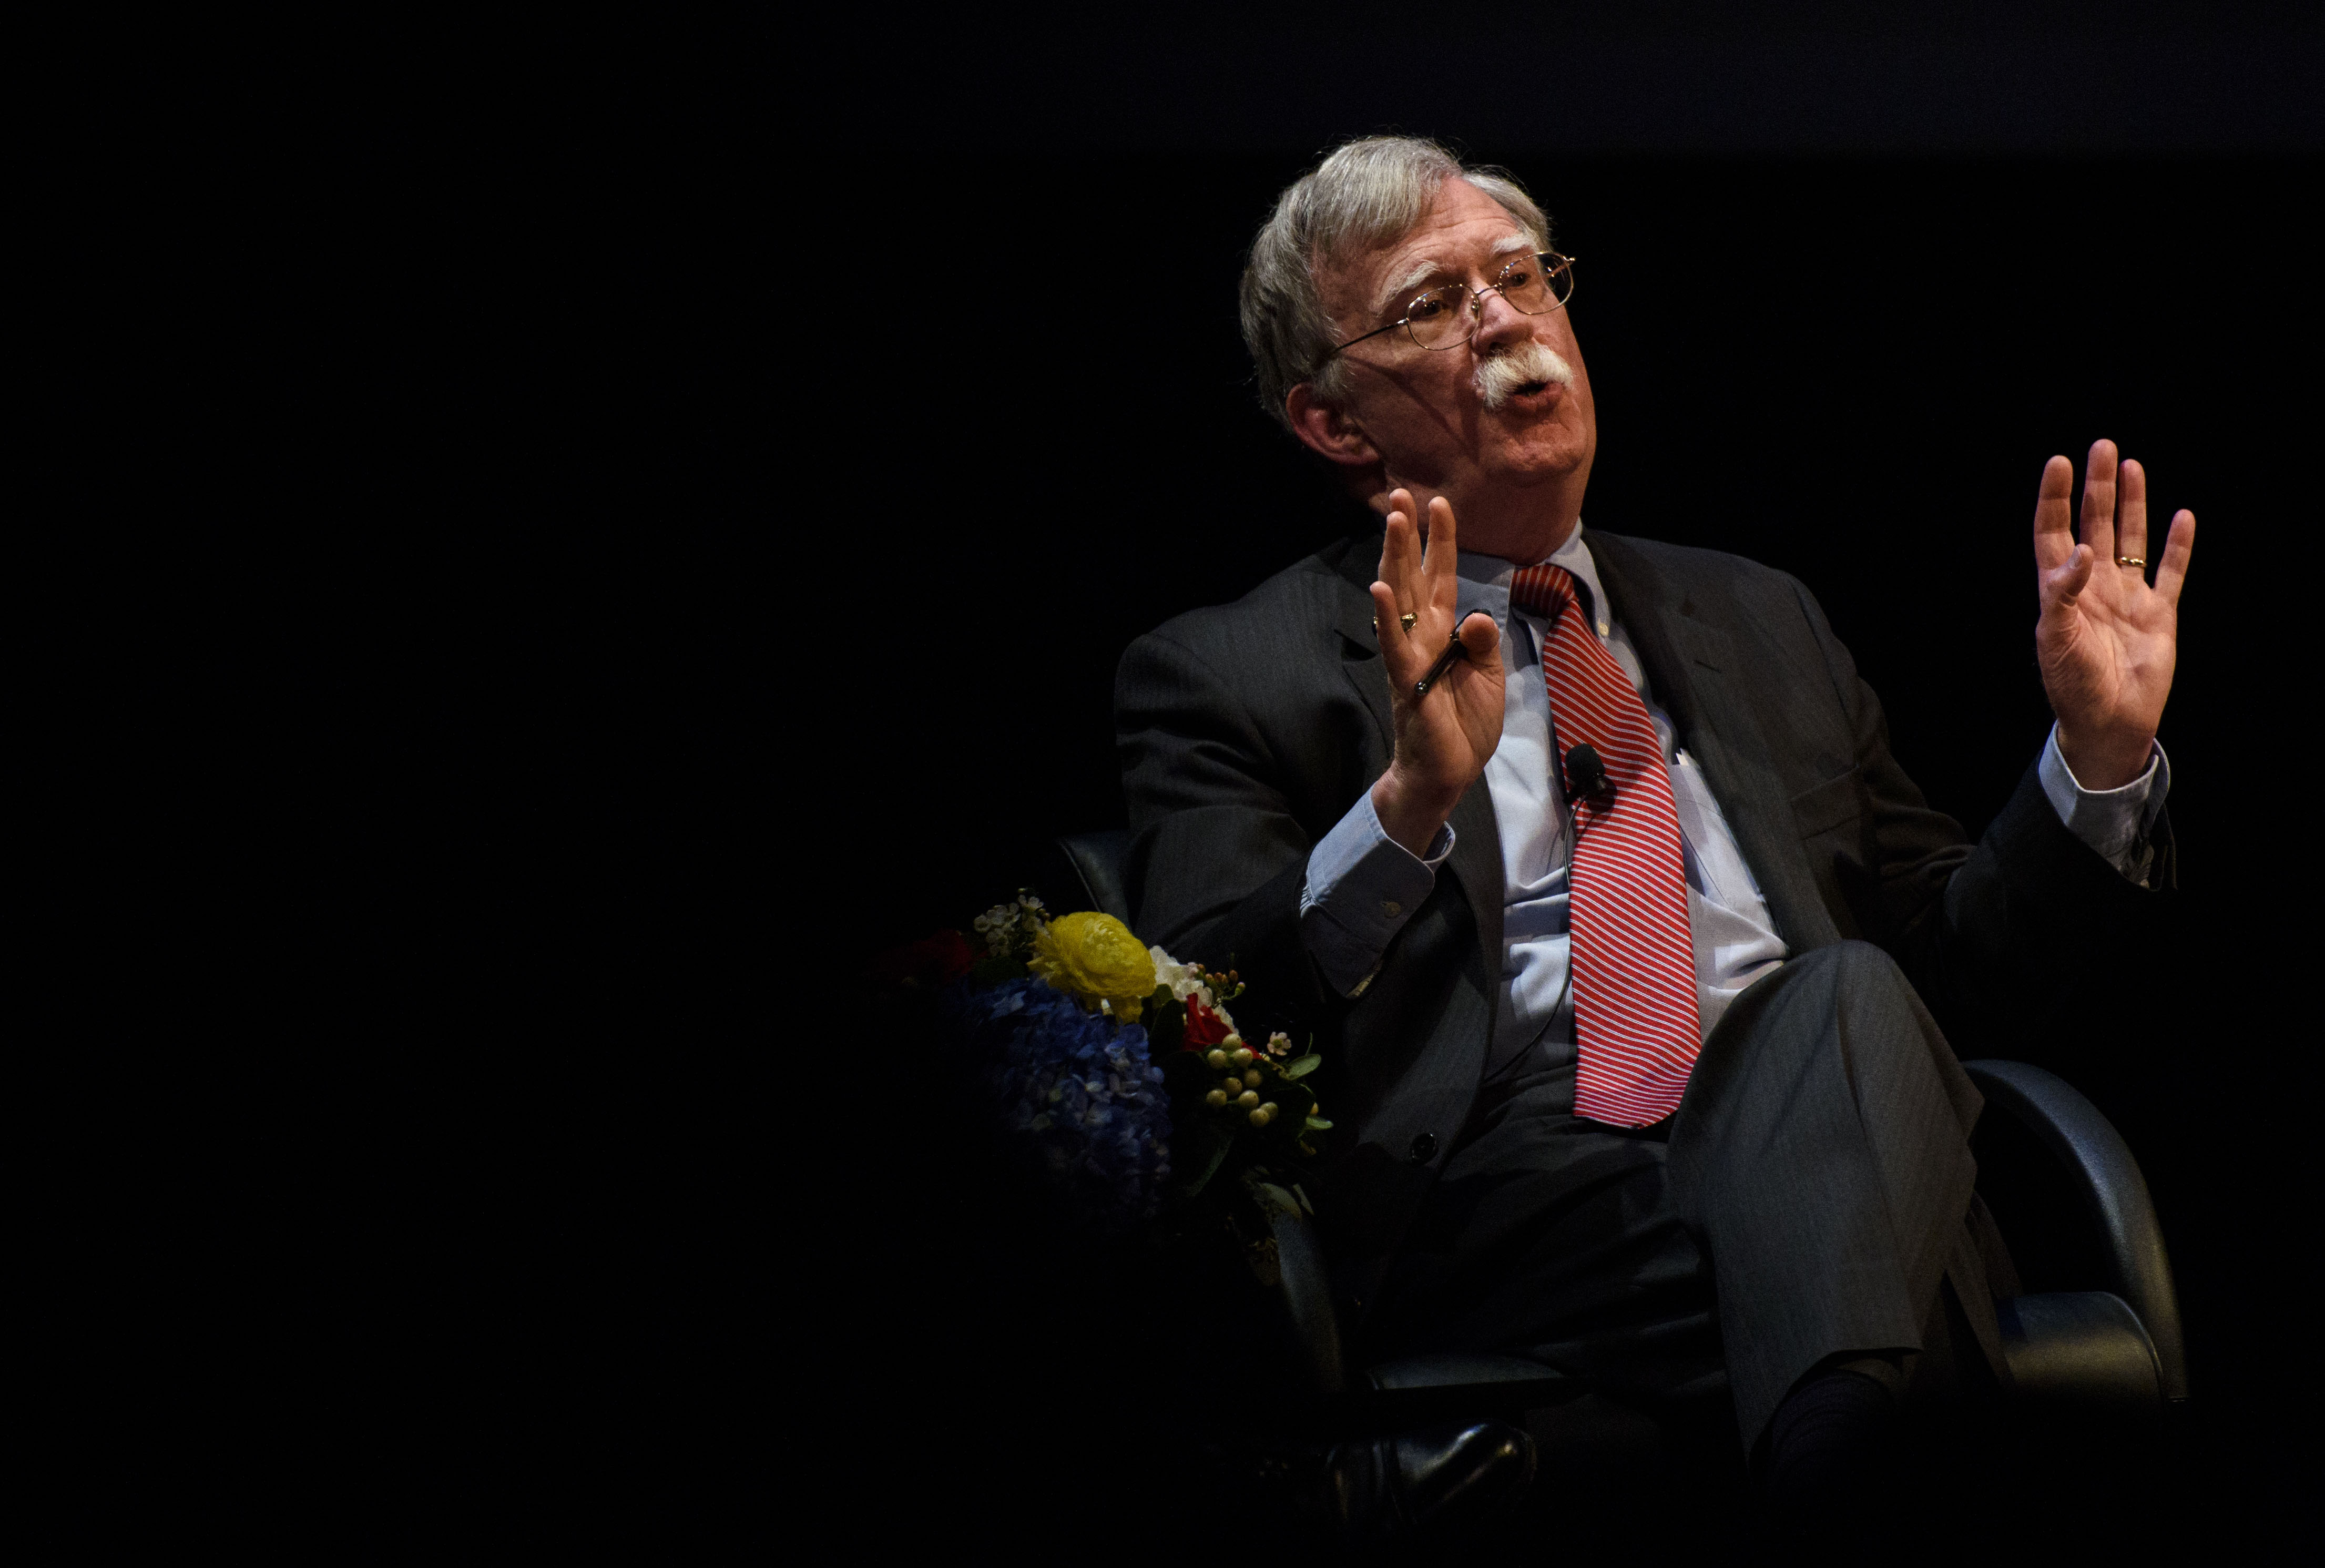 DURHAM, NC - FEBRUARY 17: Former National Security Advisor John Bolton discusses the "current threats to national security" during a forum moderated by Peter Feaver, the director of Duke's American Grand Strategy, at the Page Auditorium on the campus of Duke University on February 17, 2020 in Durham, North Carolina. A sold out crowd joined to listen to reflections from John Bolton's life's work. Questions from the audience were offered to Bolton by the moderator. A scheduled protest was held outside while attendees lined up for entrance. (Photo by Melissa Sue Gerrits/Getty Images)